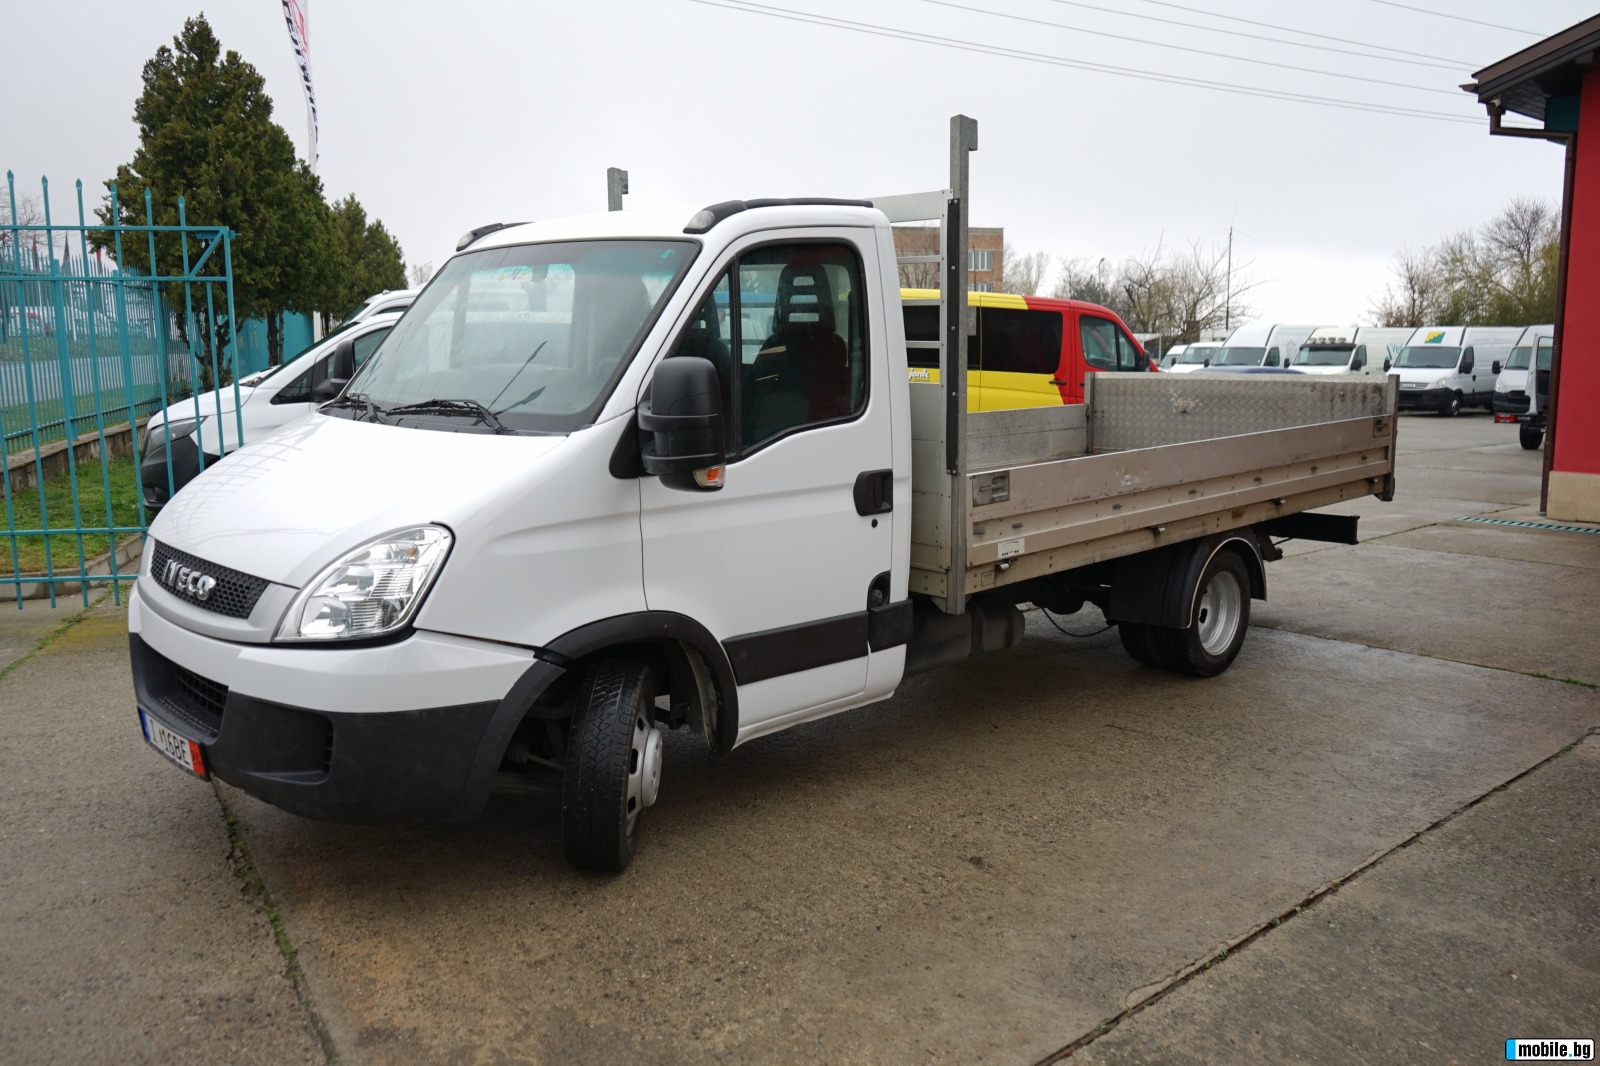 Iveco Daily 35c18* 3.0HPT*  | Mobile.bg   4